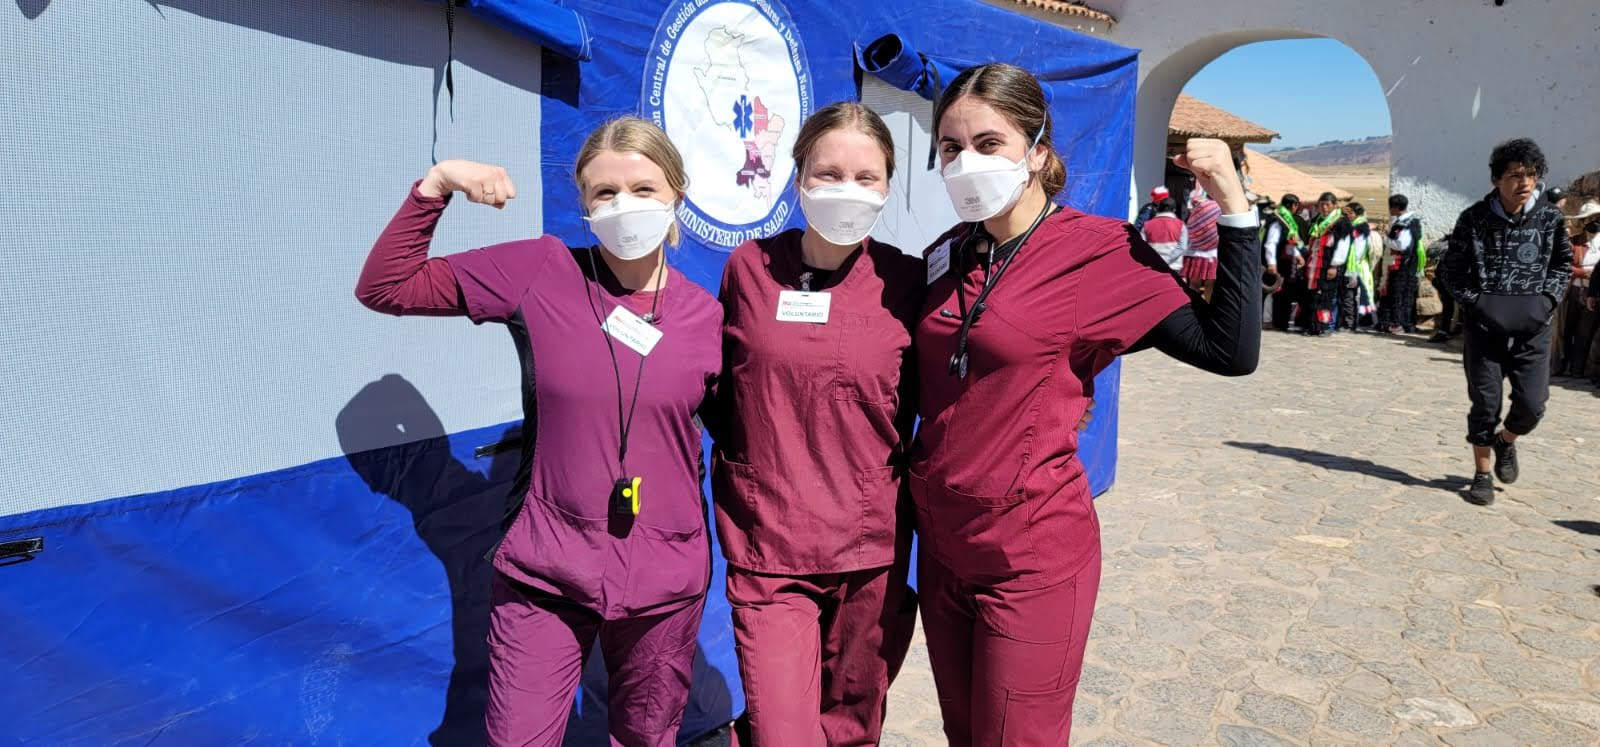 Edson College students pose in maroon scrubs with blue surgical masks on outside of a clinic in Peru